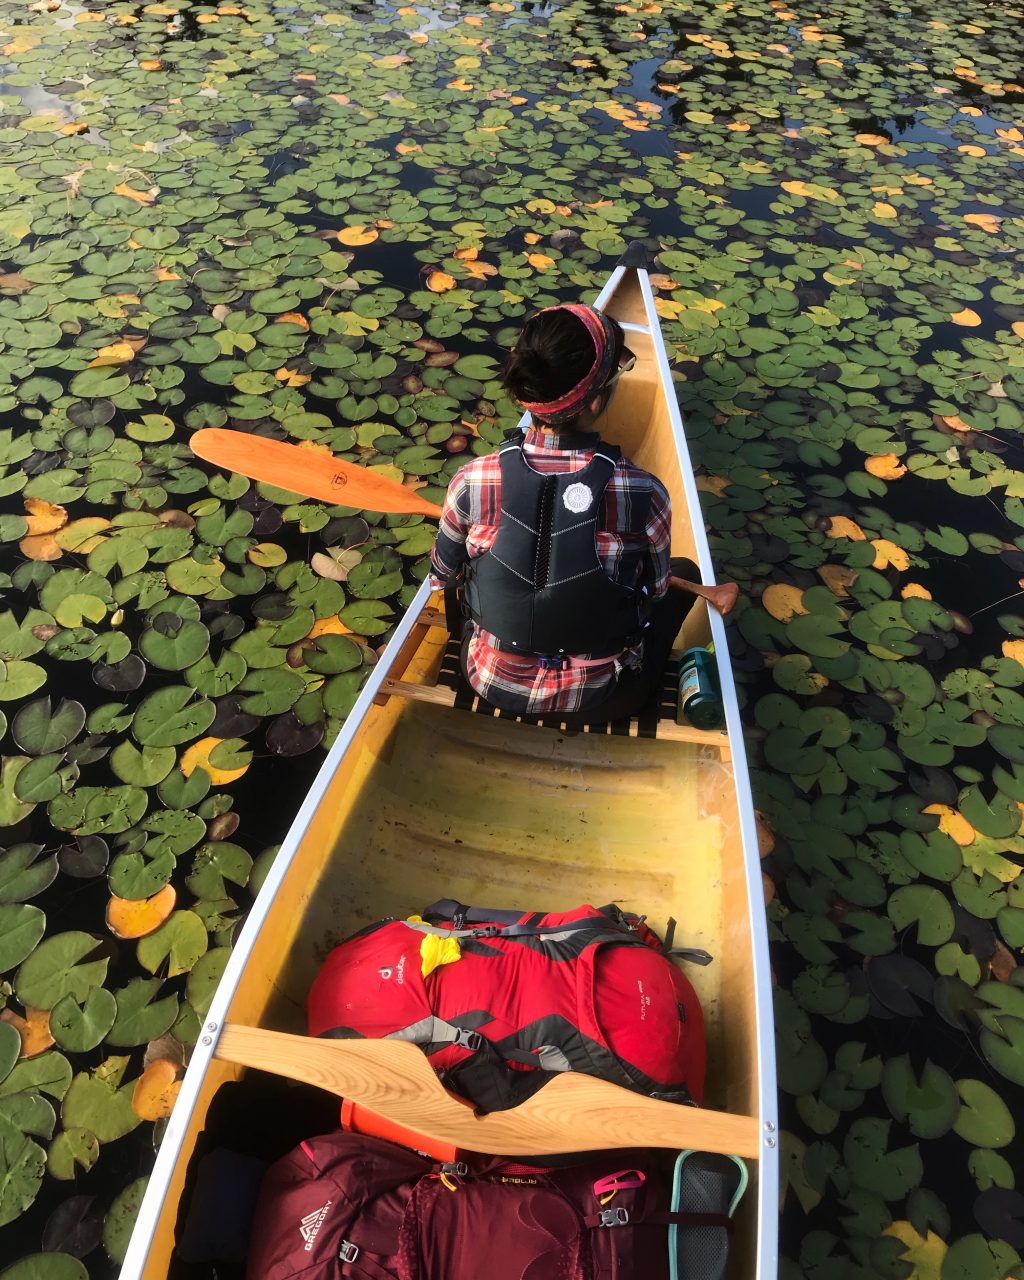 Women in canoe floating in water, surrounded by lily pads